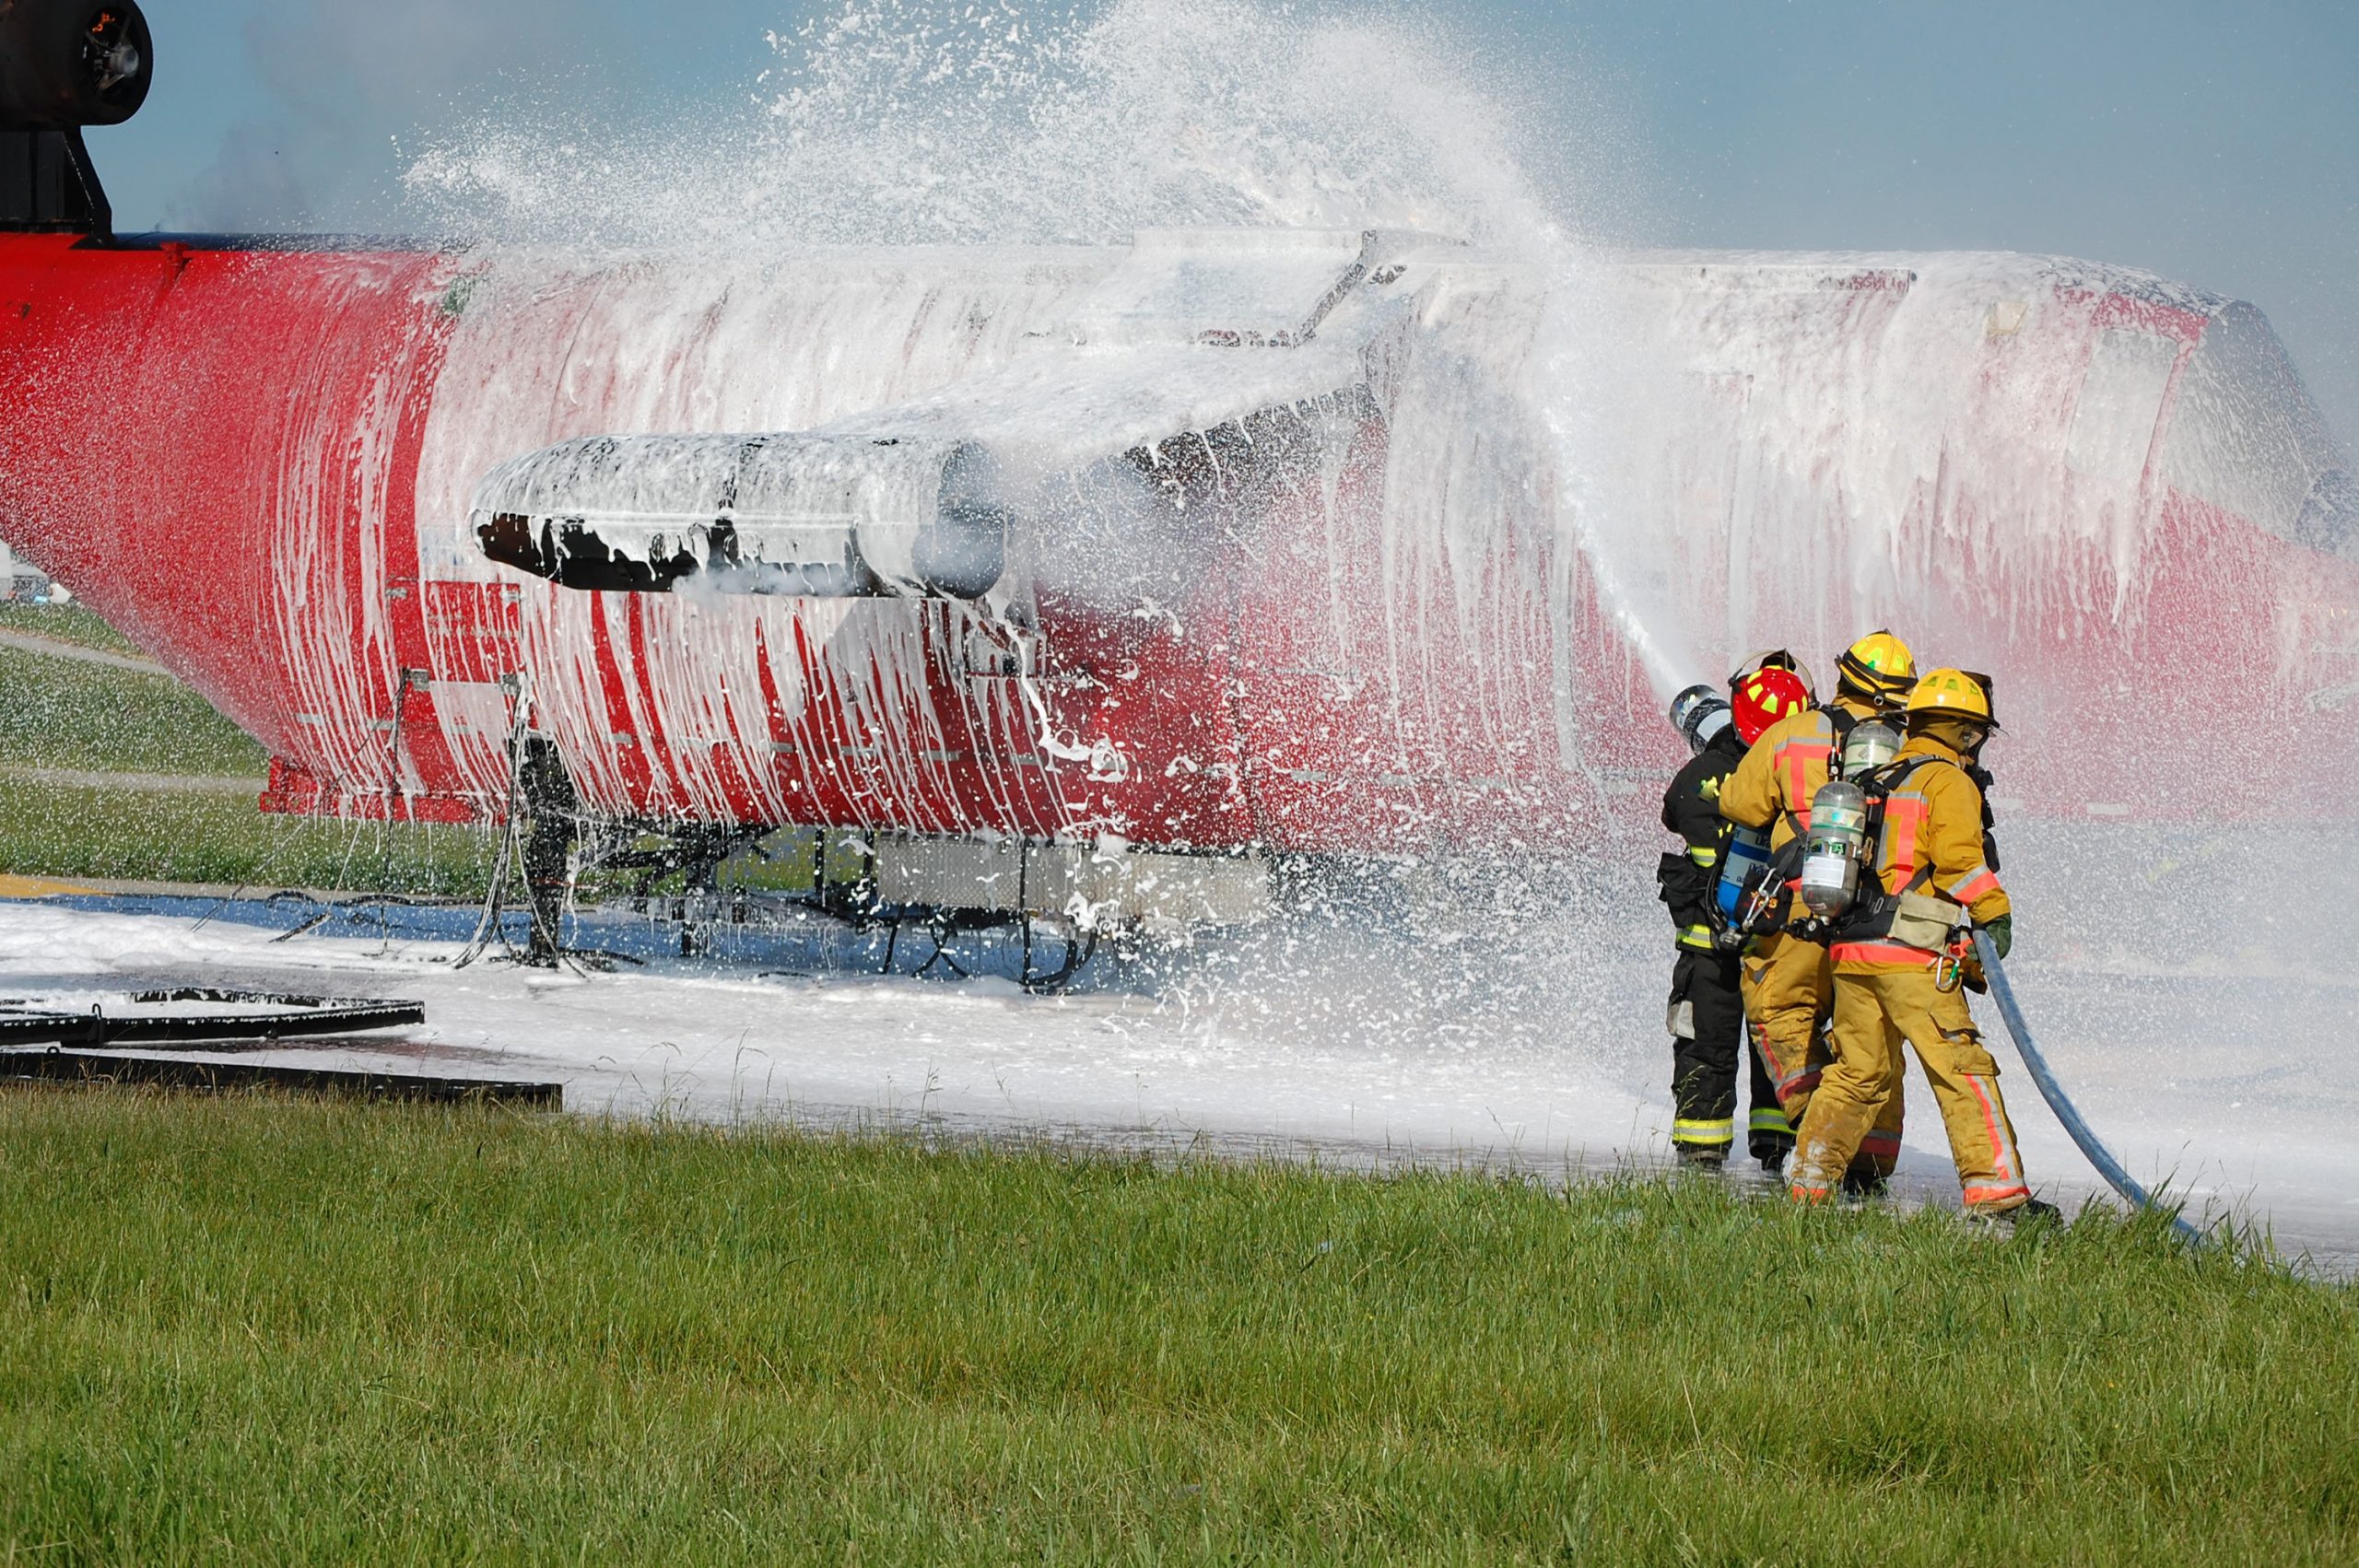 Firefighters spray an airplane with firefighting foam.